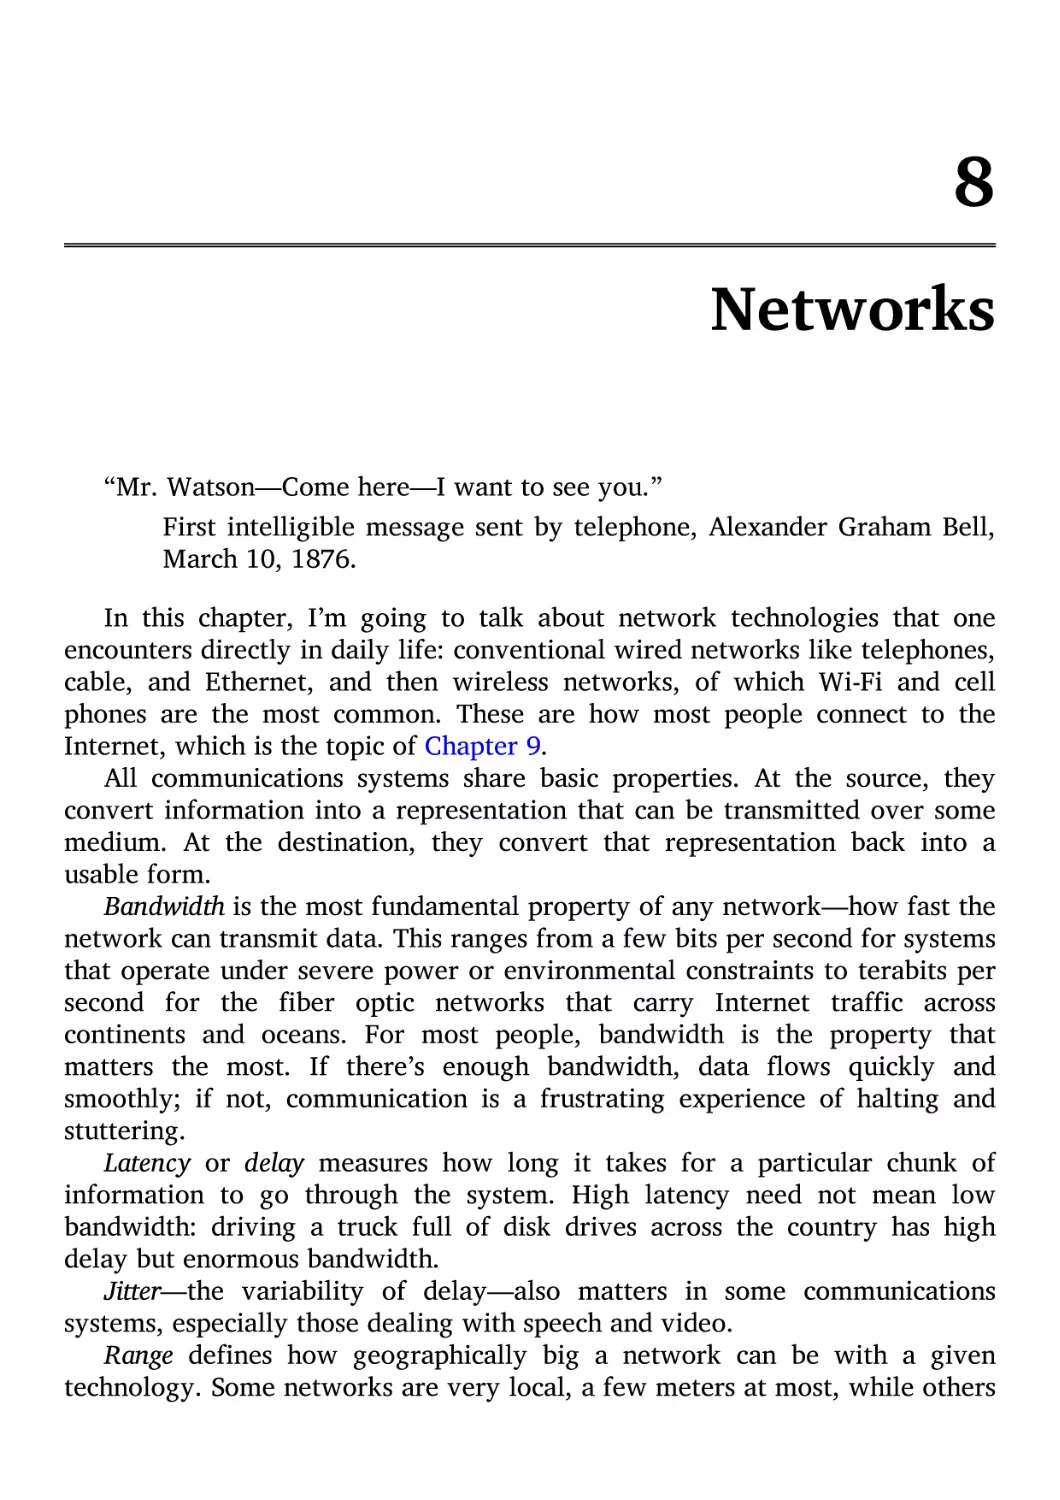 8. Networks